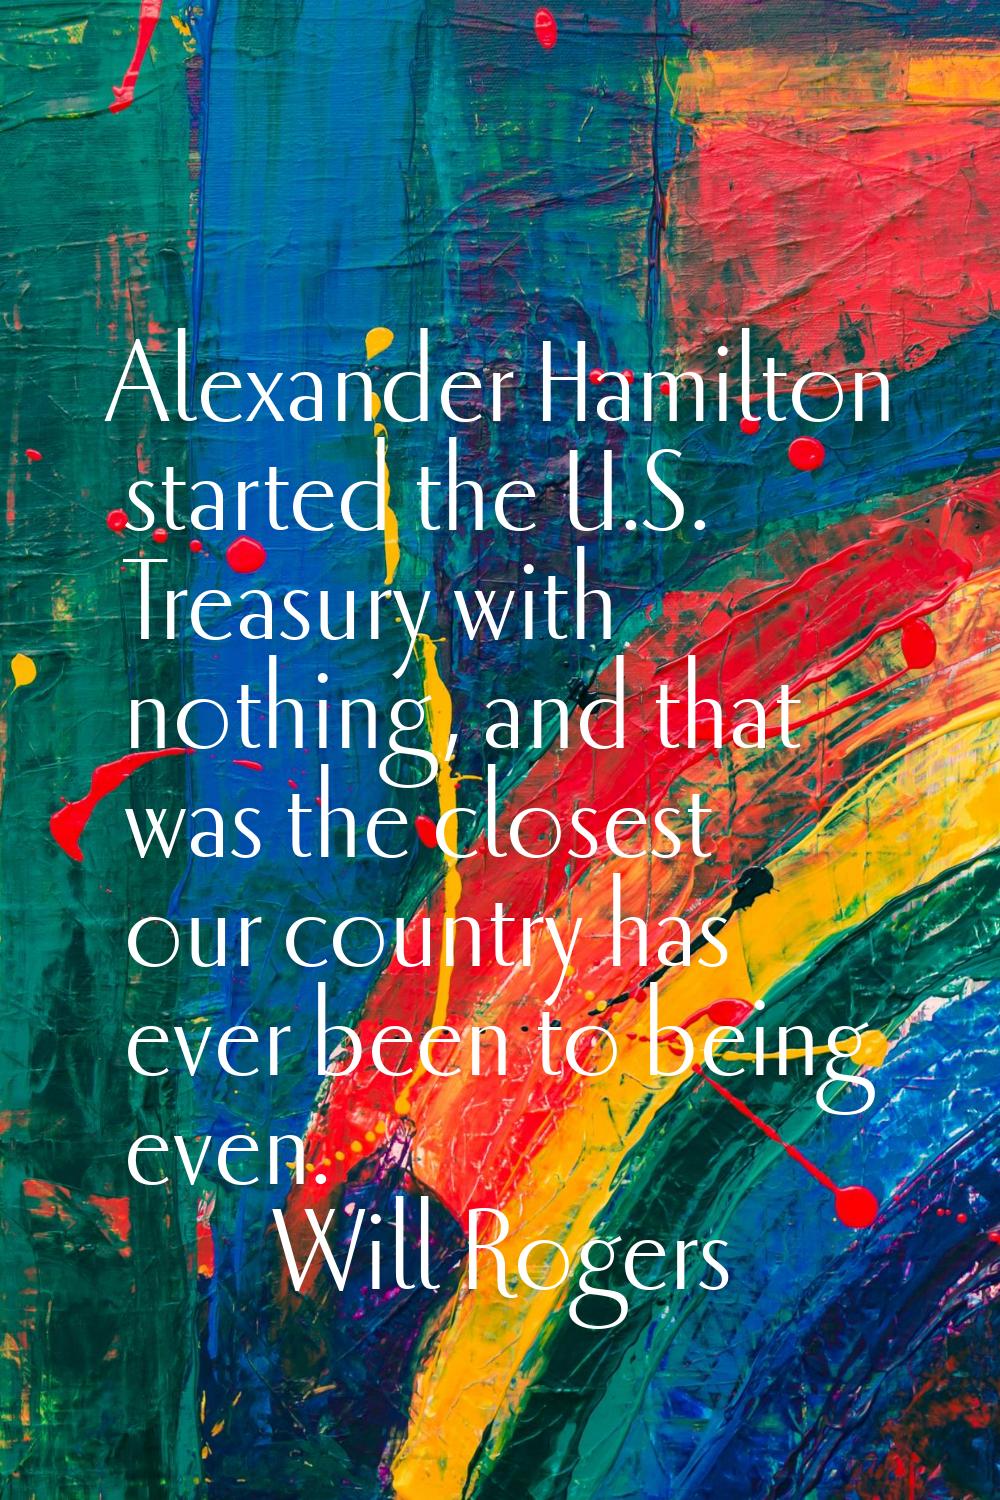 Alexander Hamilton started the U.S. Treasury with nothing, and that was the closest our country has